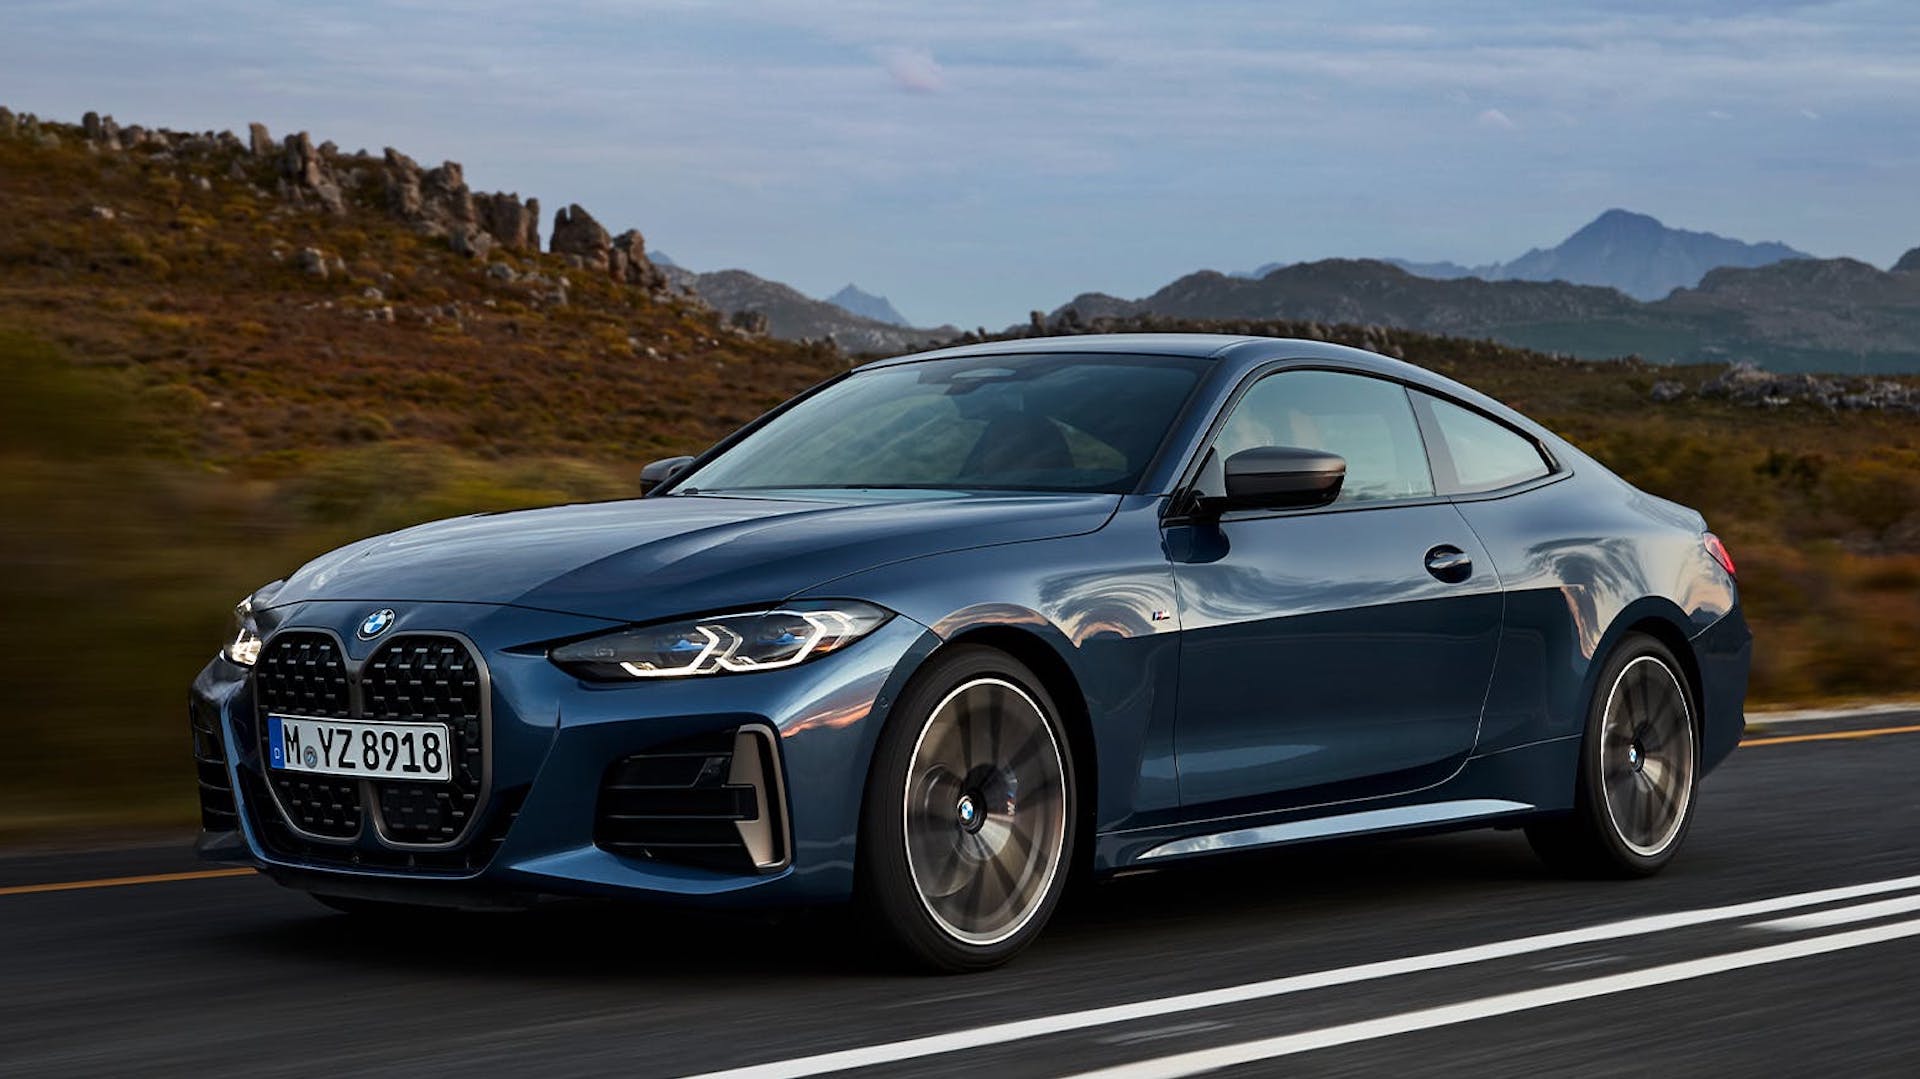 2021 BMW 4 Series Coupe Axes Manual Transmission, Goes Hybrid, Adds… That Grille